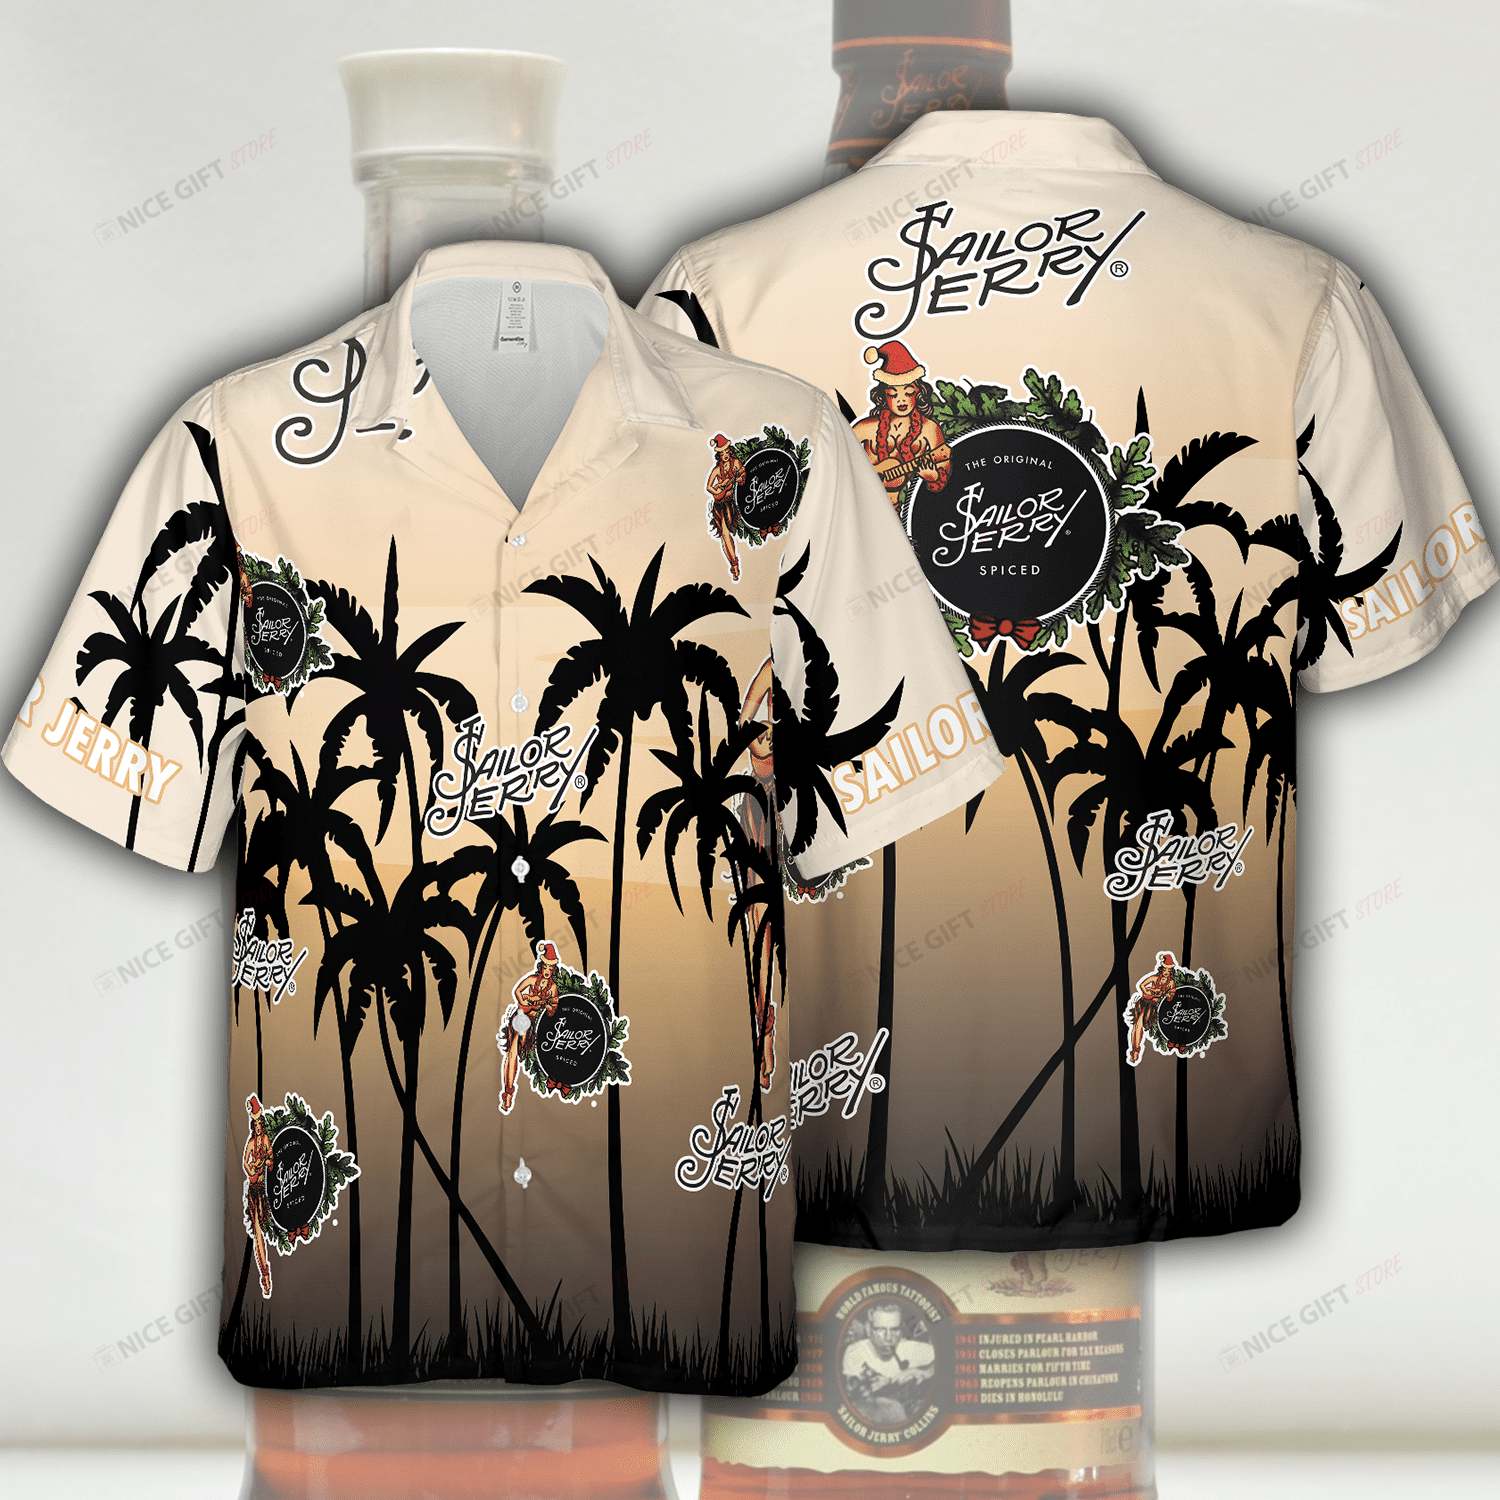 If you're a fan of a Hawaiian Shirt, you can choose one at our store 82